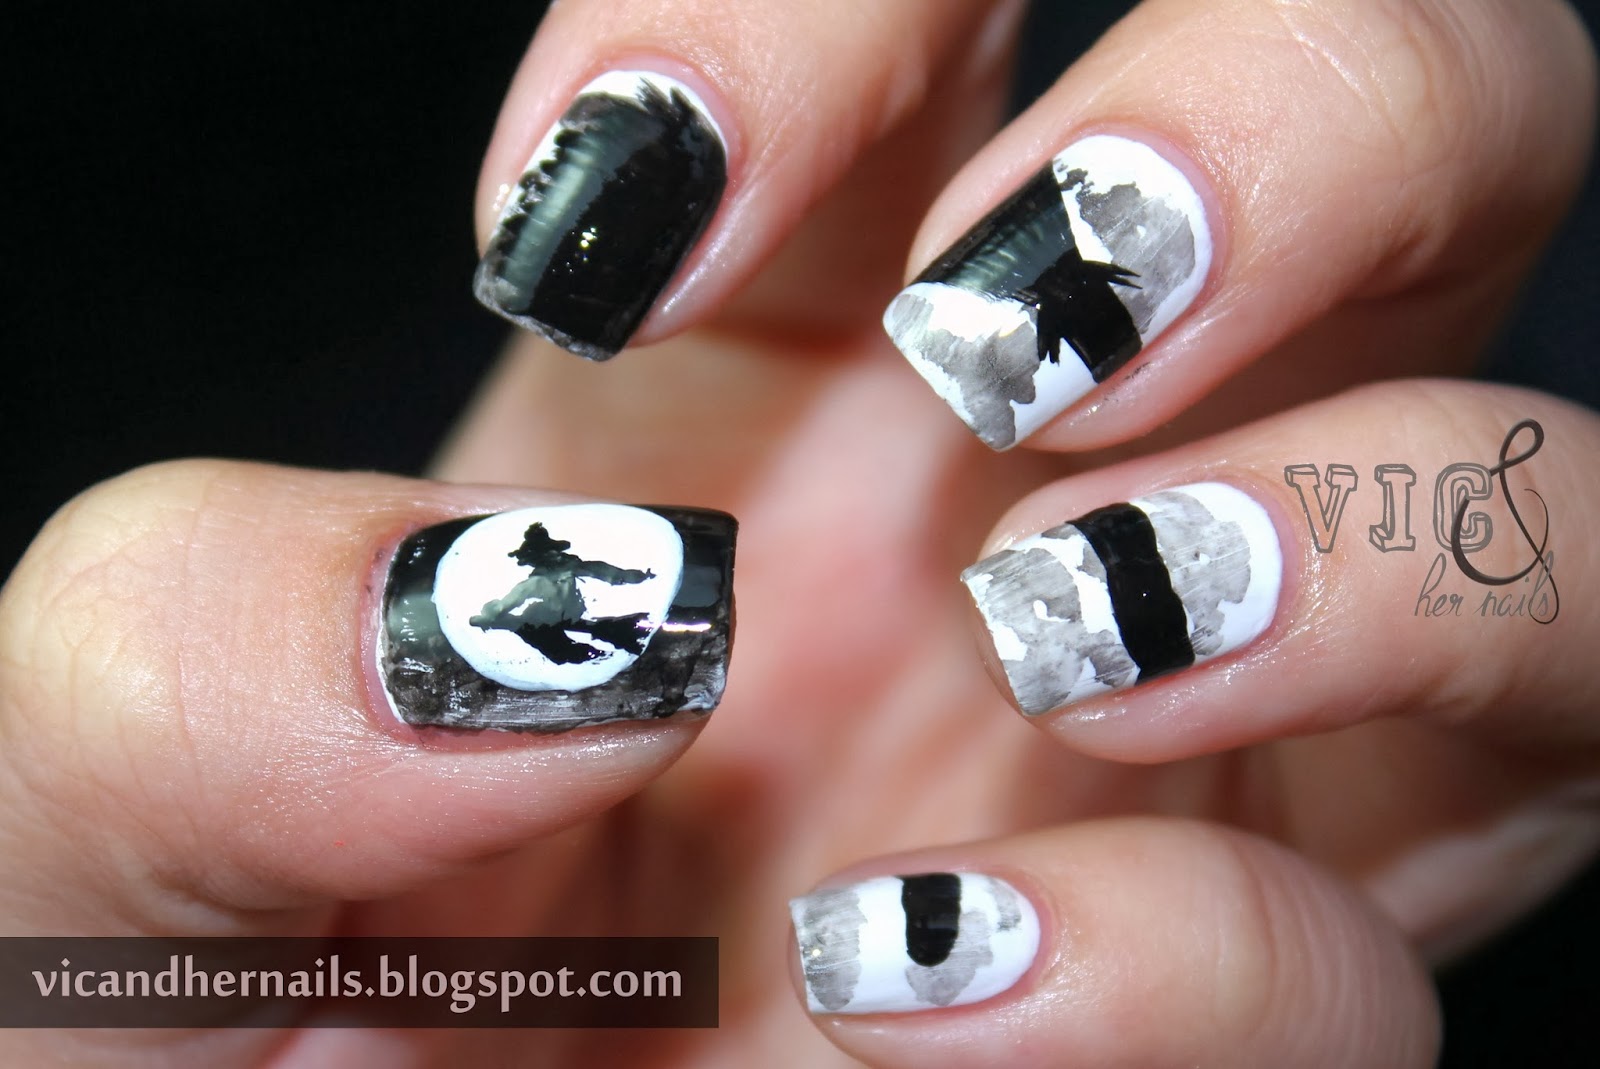 5. Creepy Halloween Nail Designs for a Scary Look - wide 9